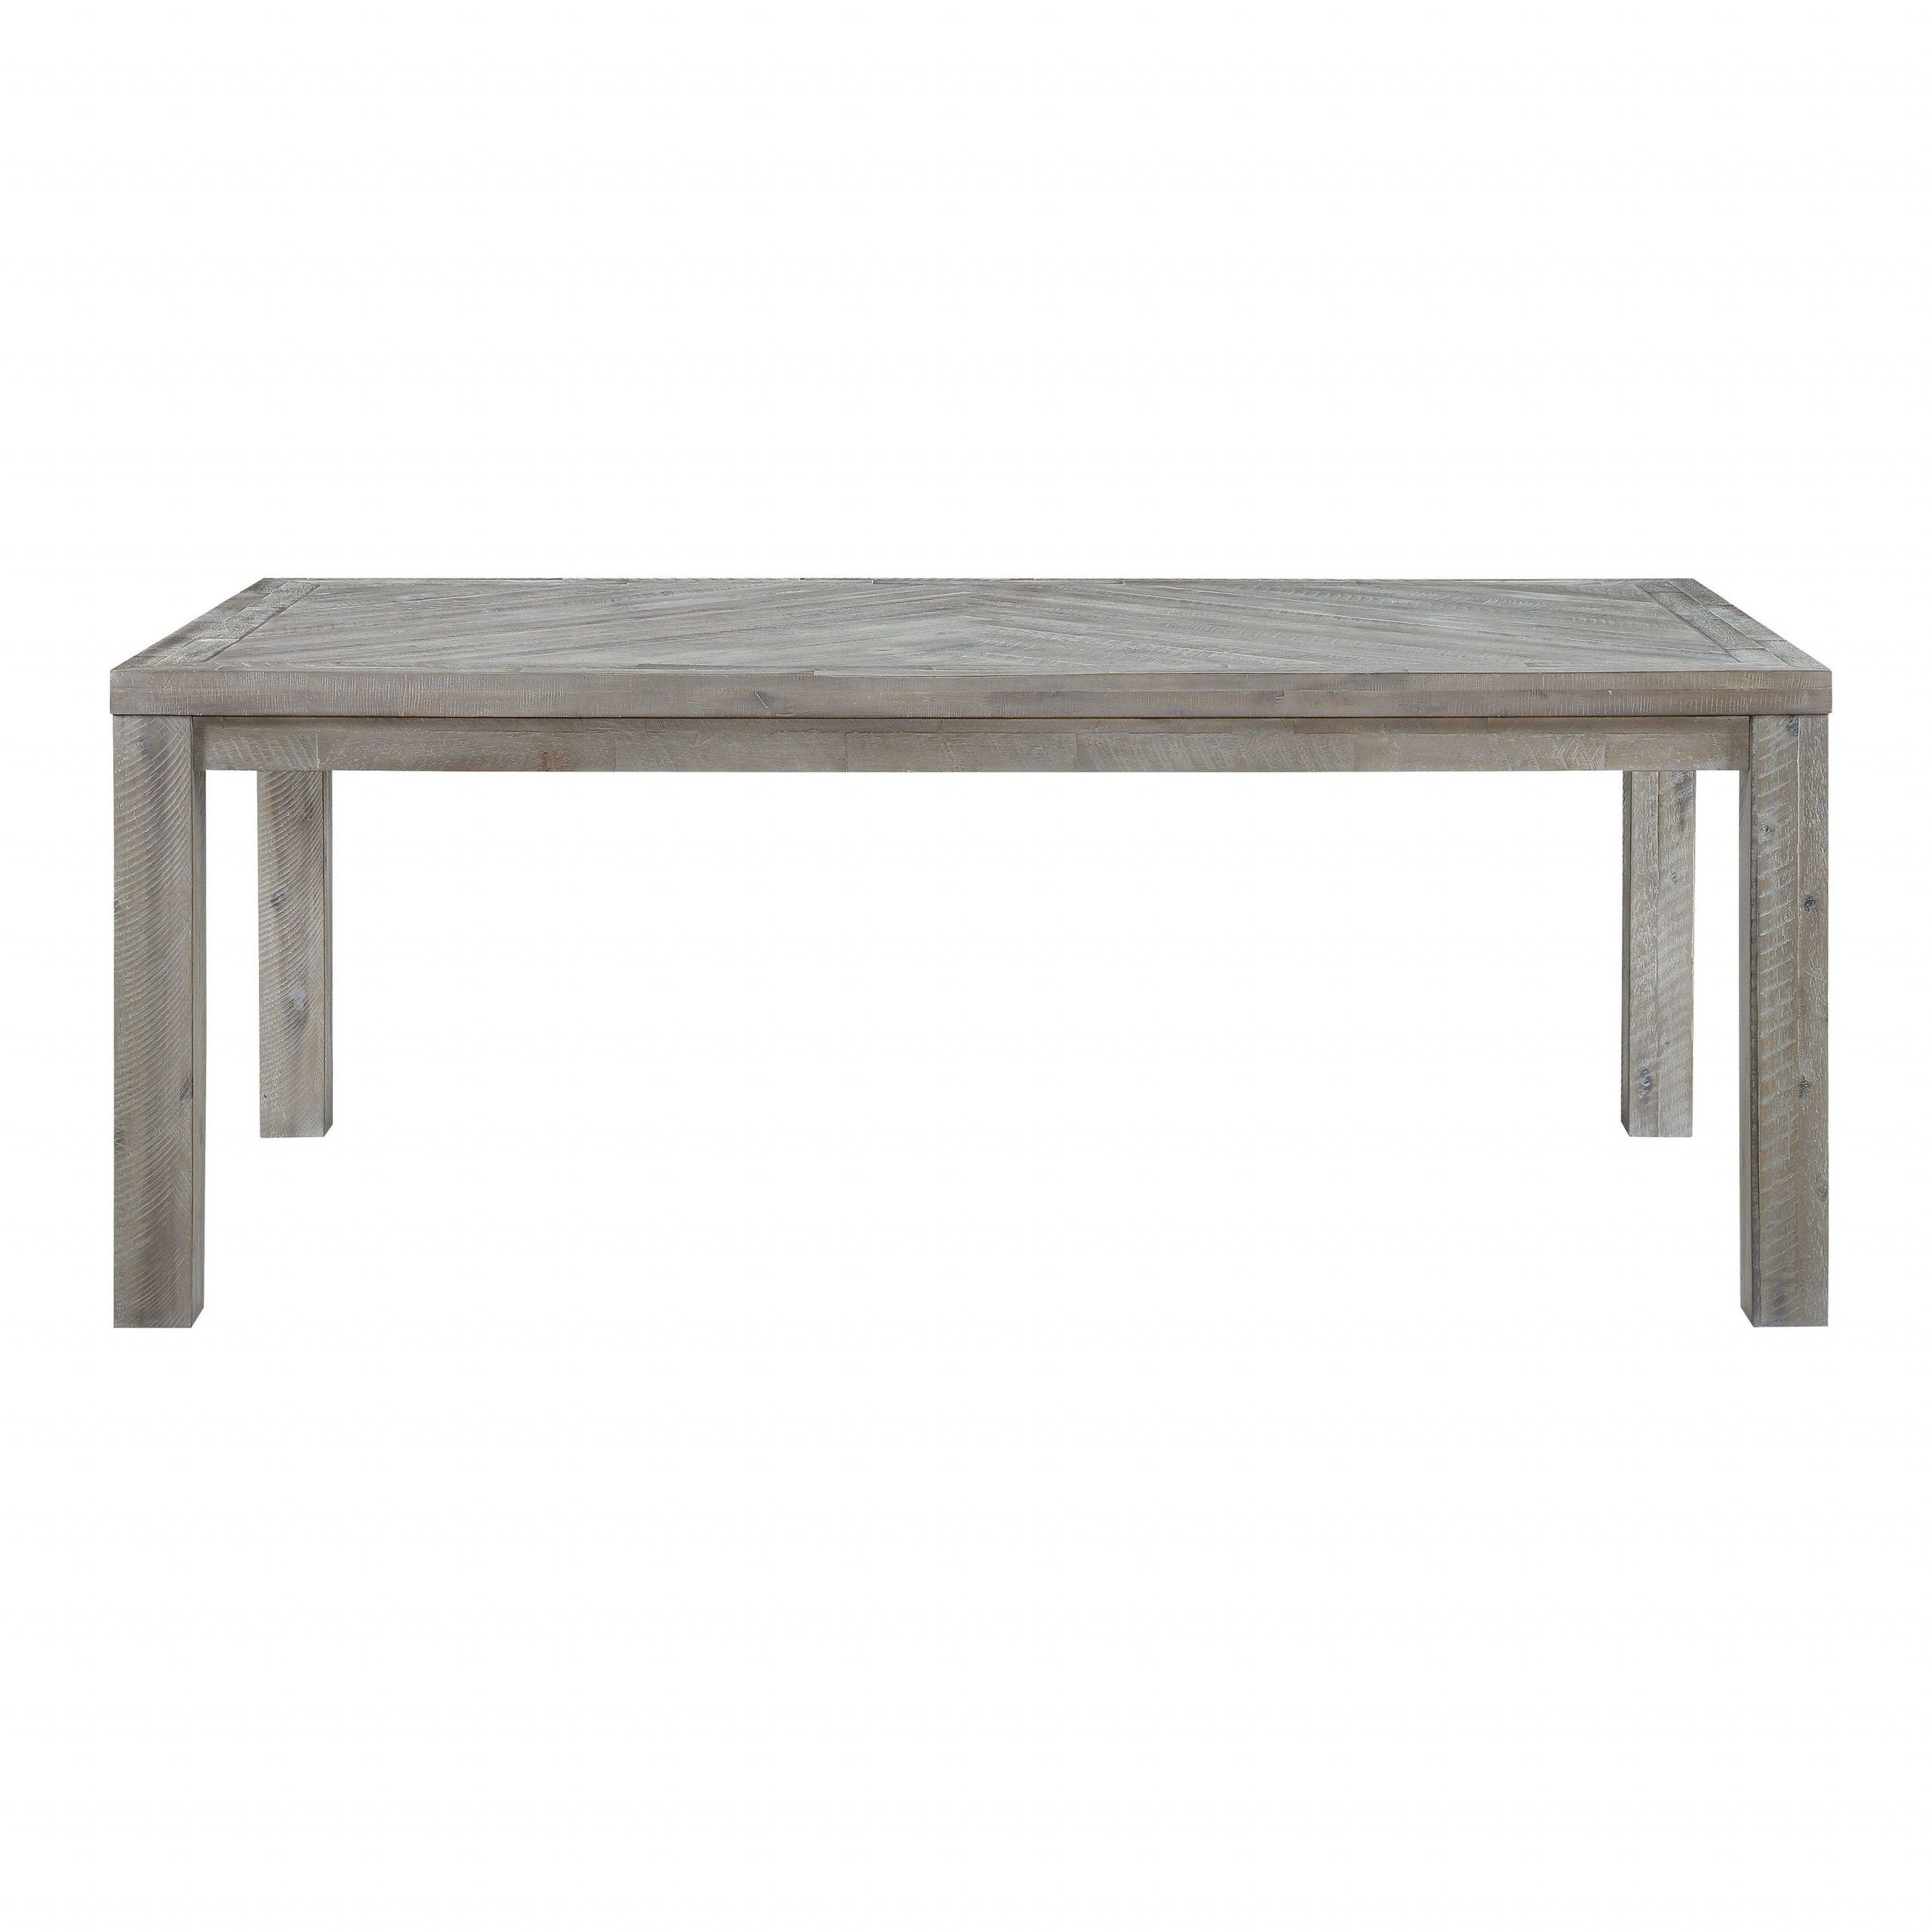 Menlo Reclaimed Wood Extending Dining Tables With Regard To 2019 The Gray Barn Daybreak Solid Wood Rectangular Dining Table In Rustic Latte (Photo 3 of 25)